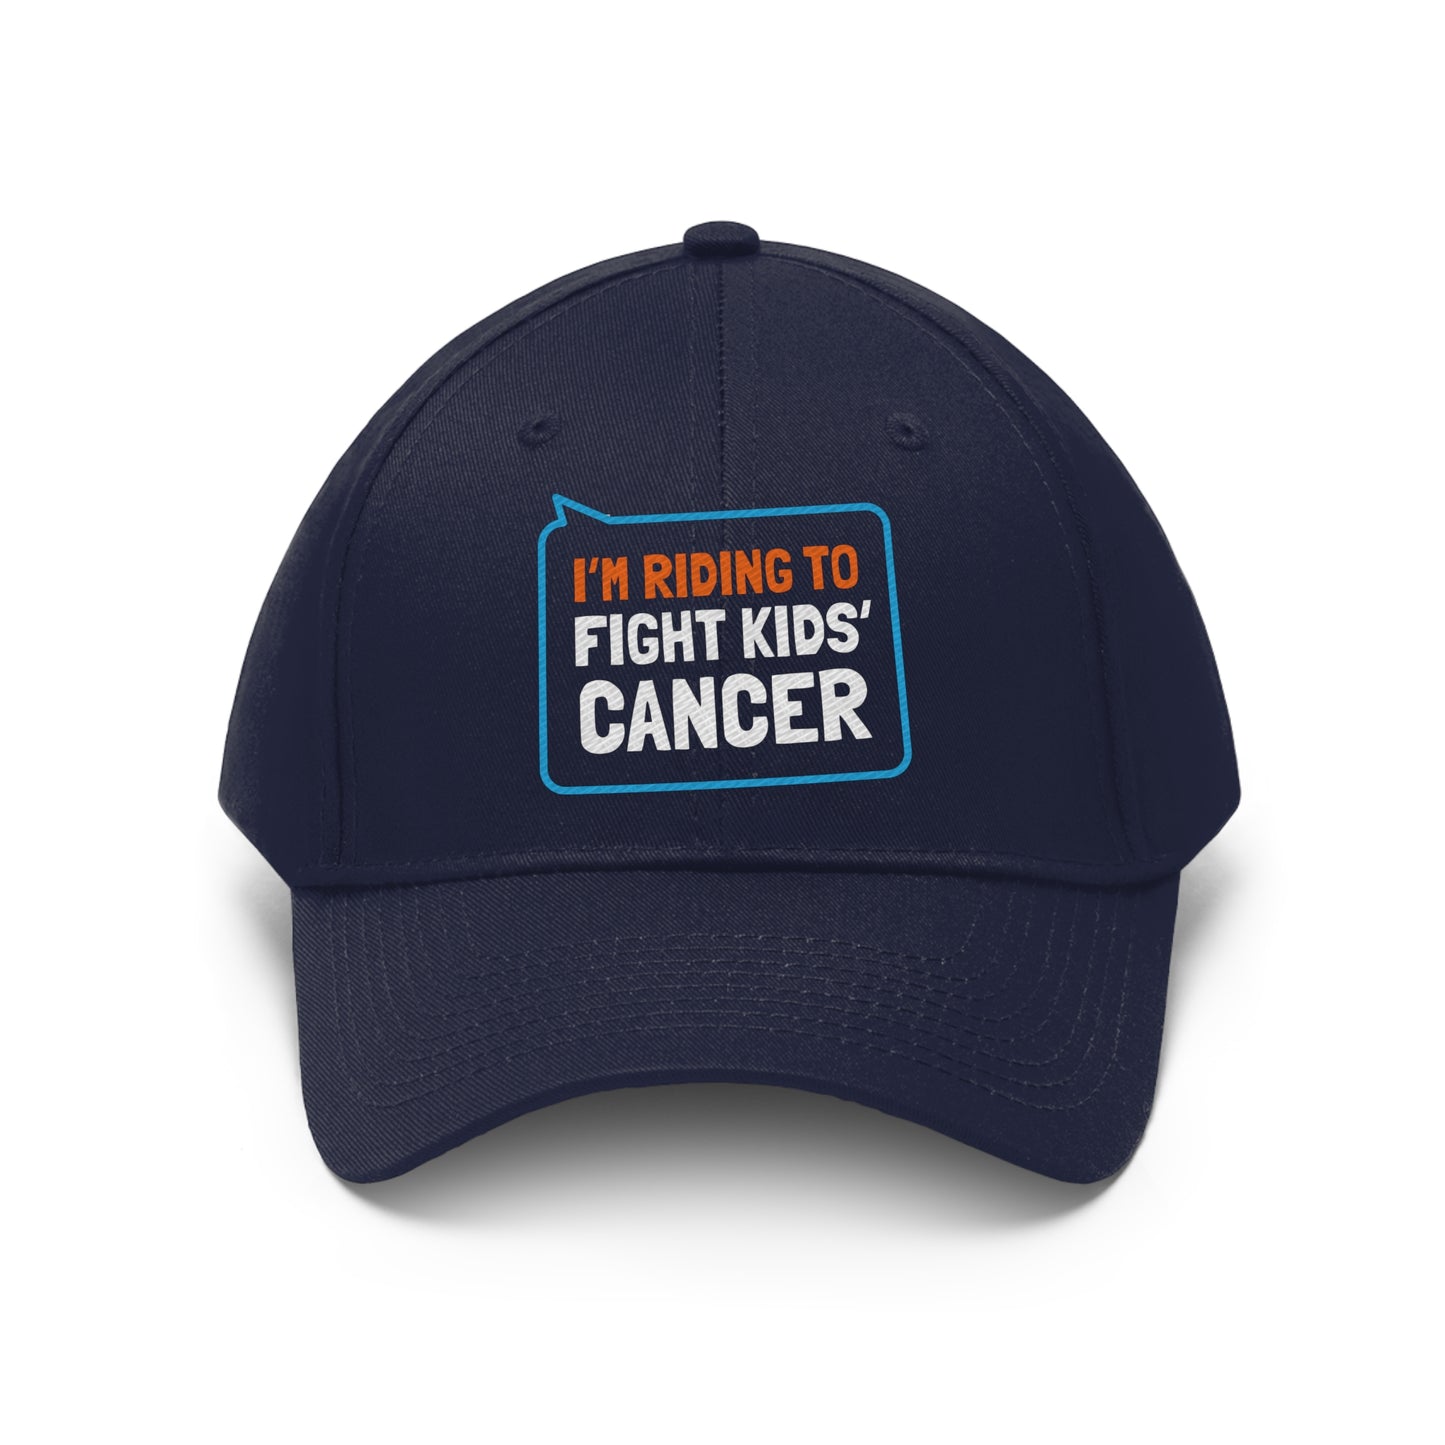 Unisex Twill Hat - I'm Riding to Fight Kids' Cancer!